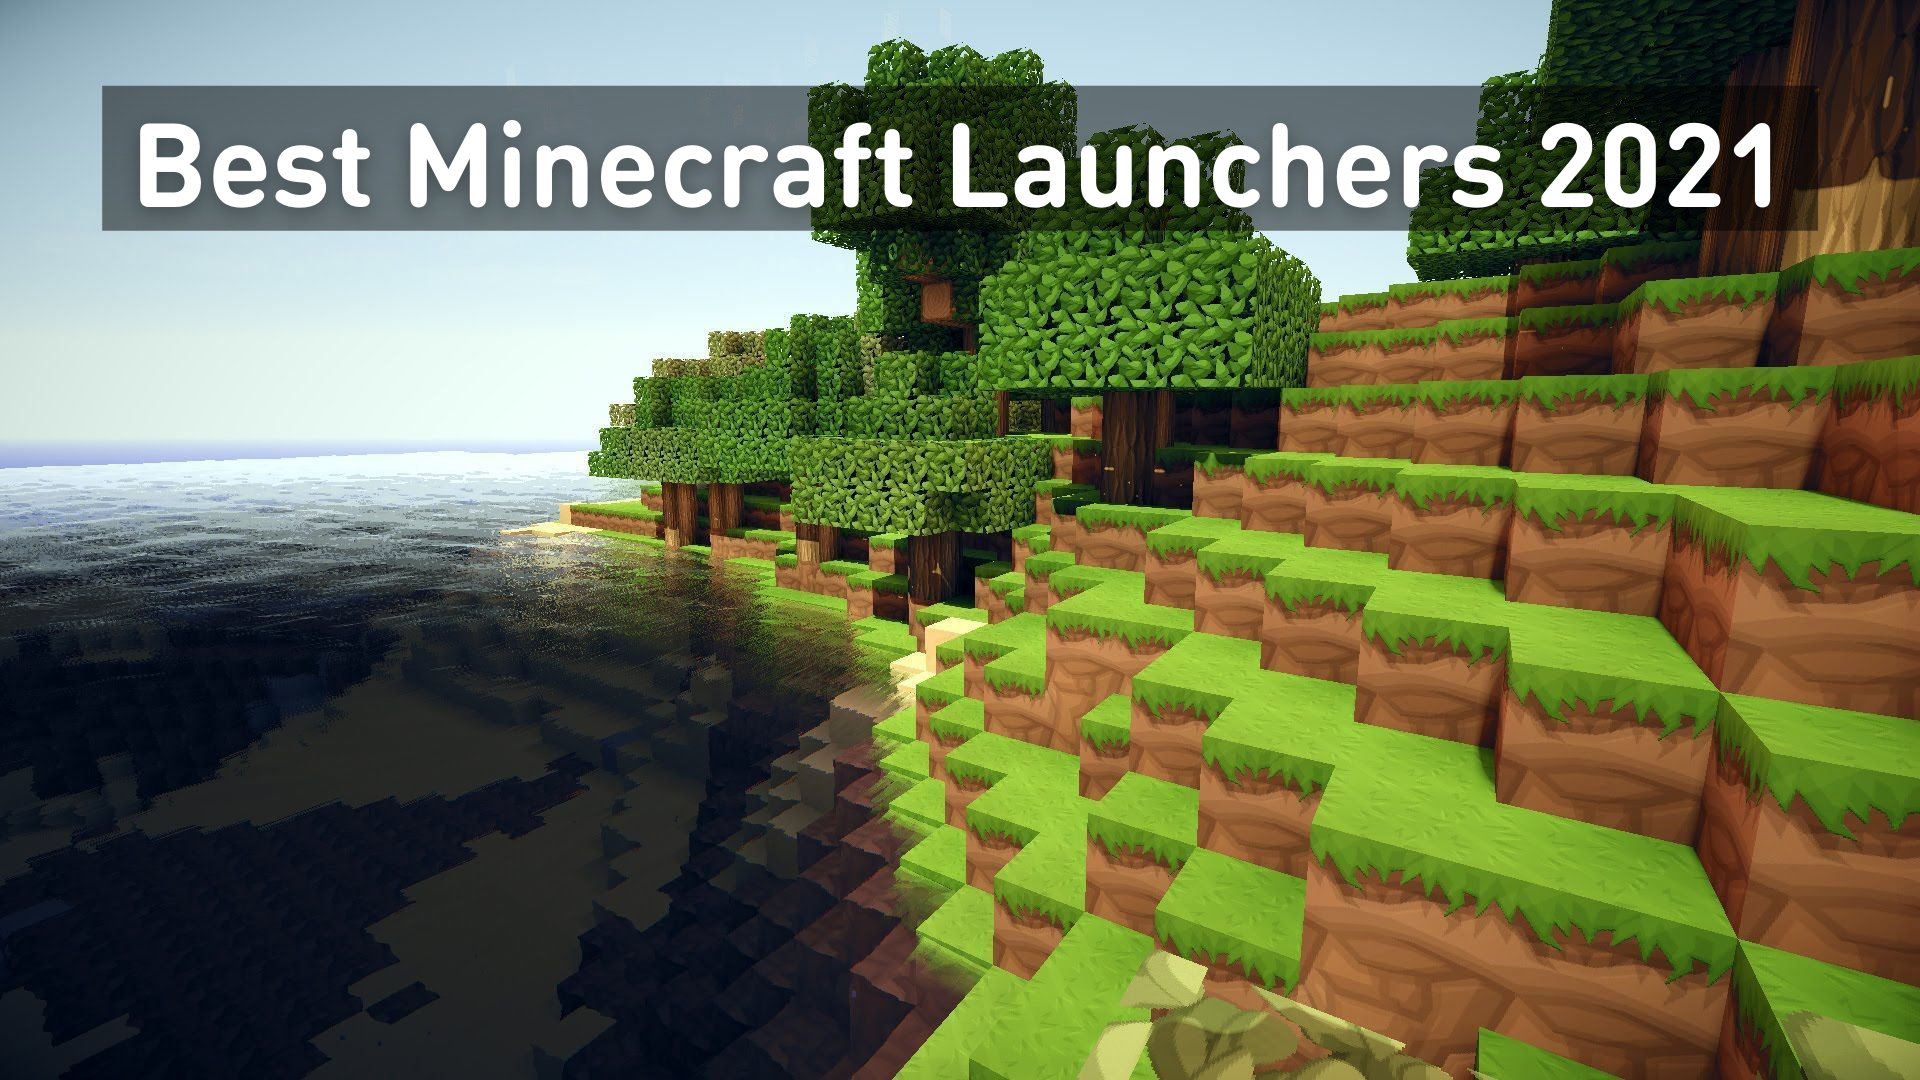 What are the Best Minecraft Launchers 2021 - Brite